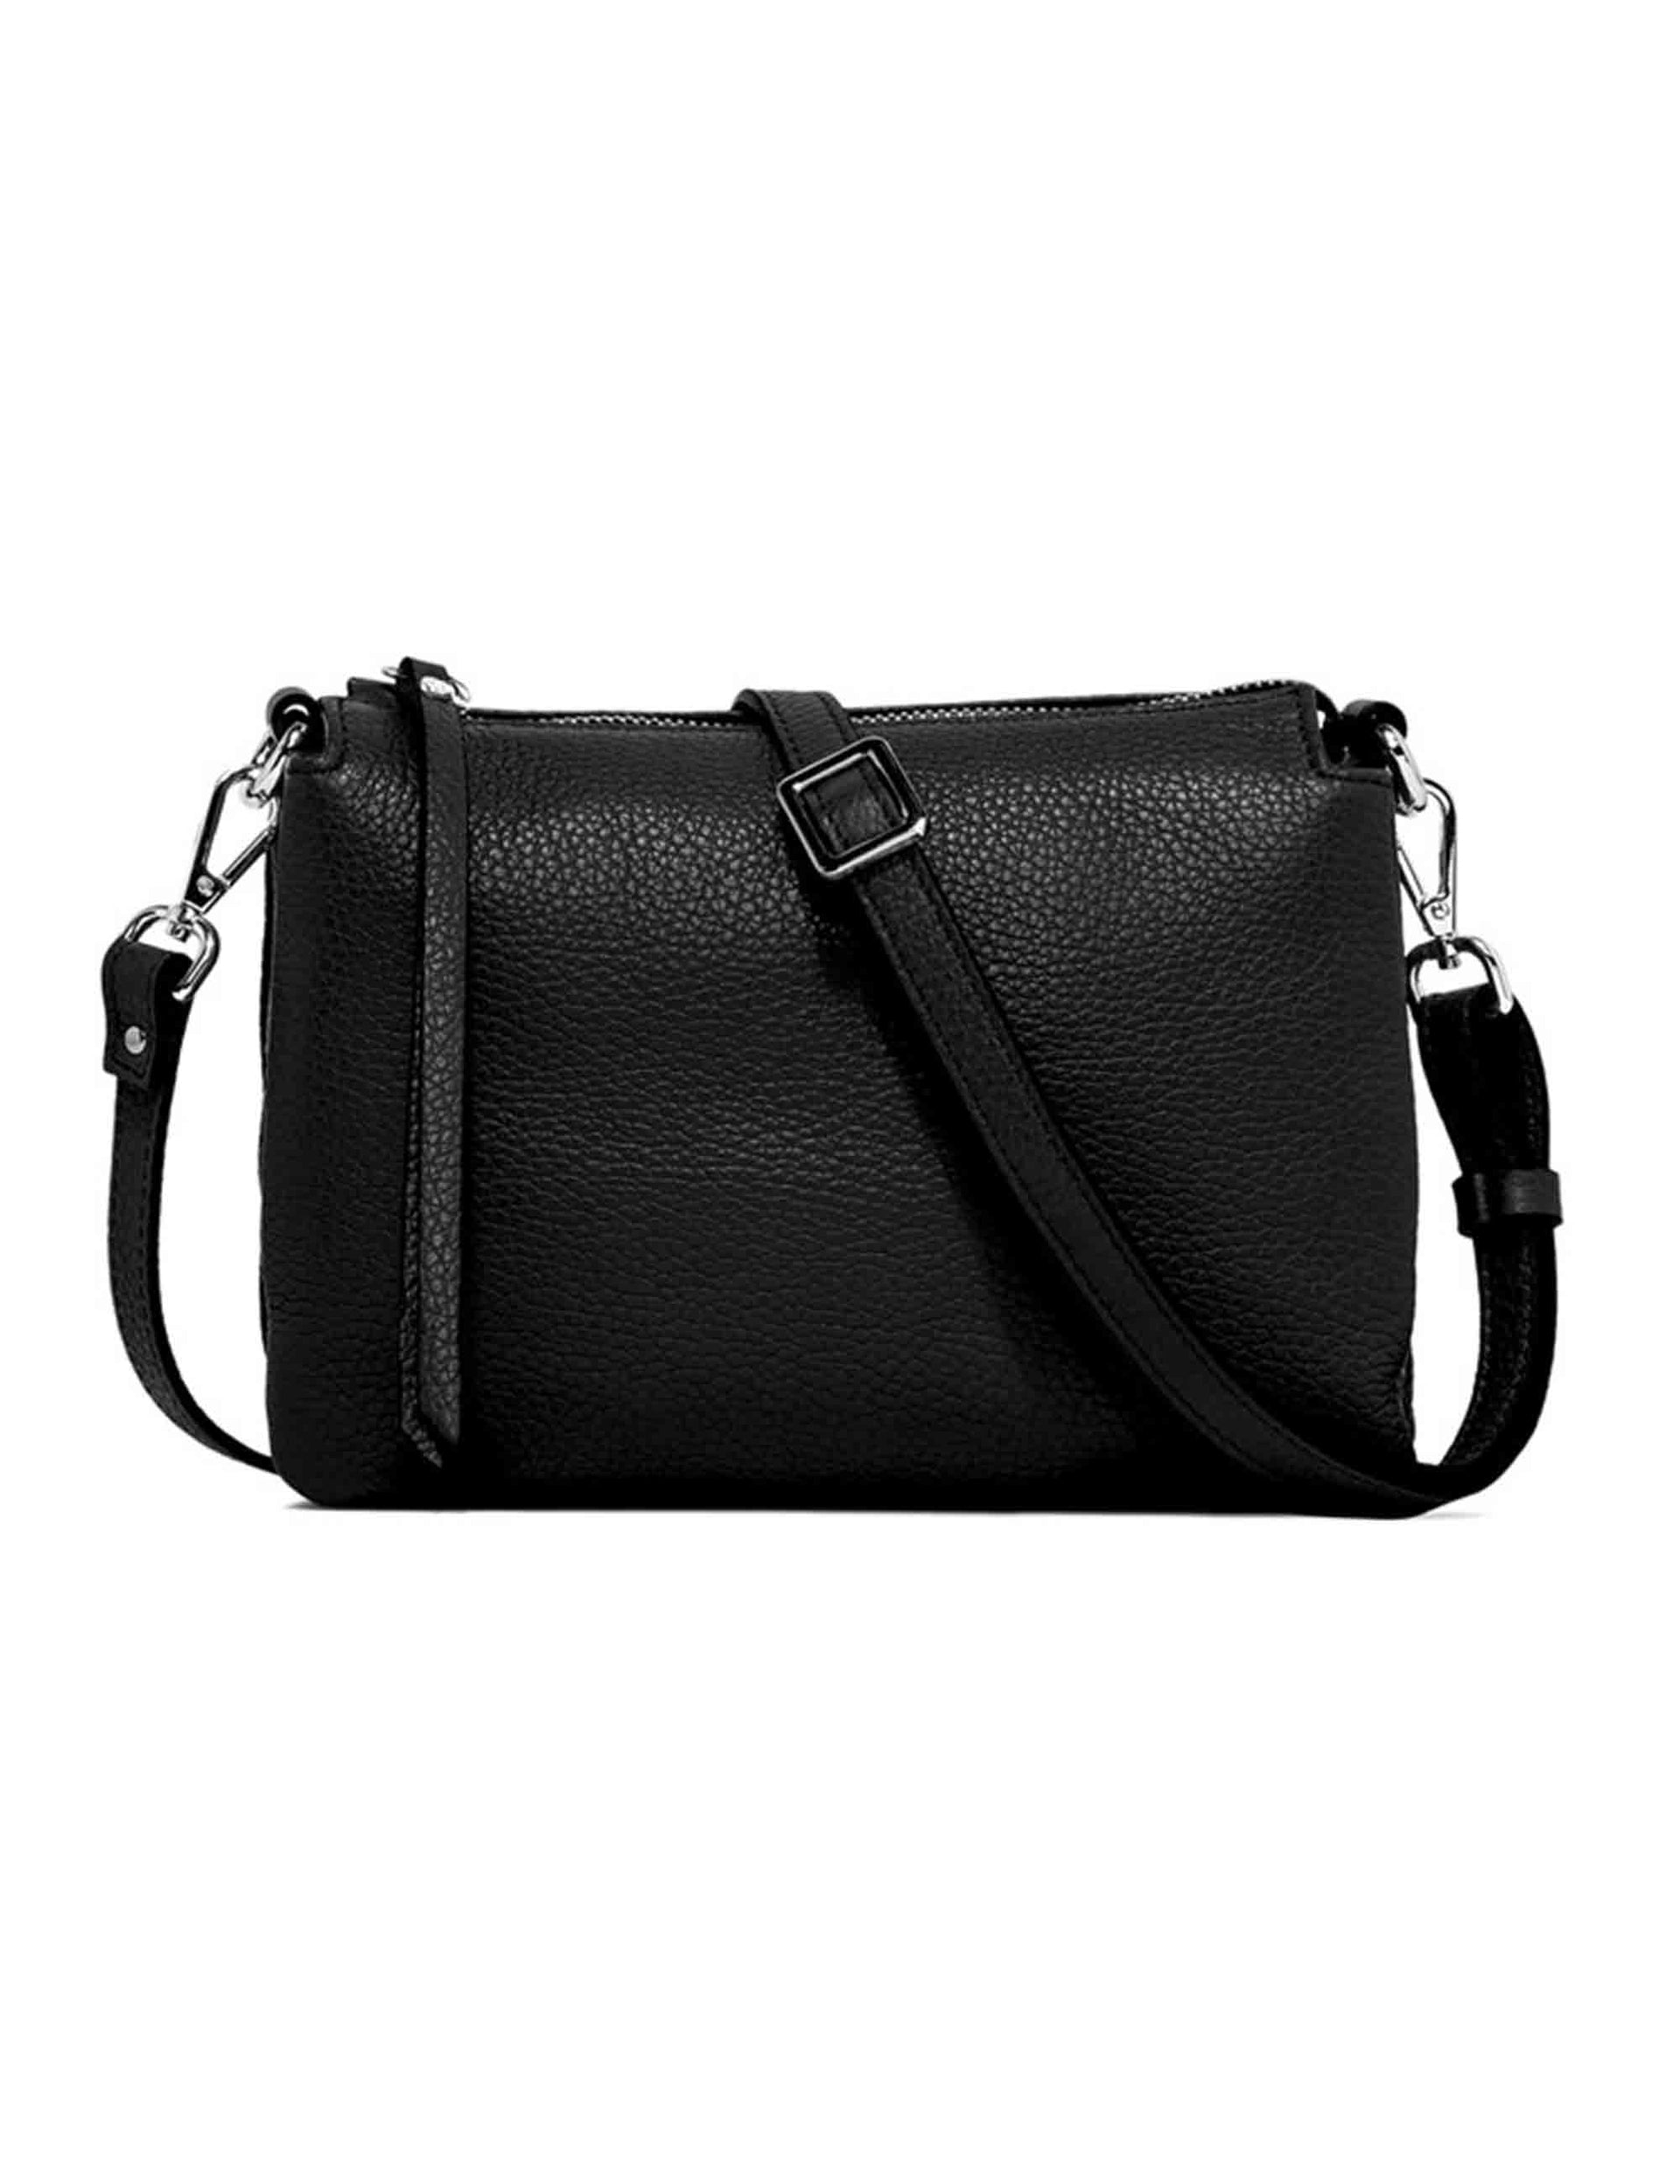 Three women's clutch bags in black leather with matching removable shoulder strap